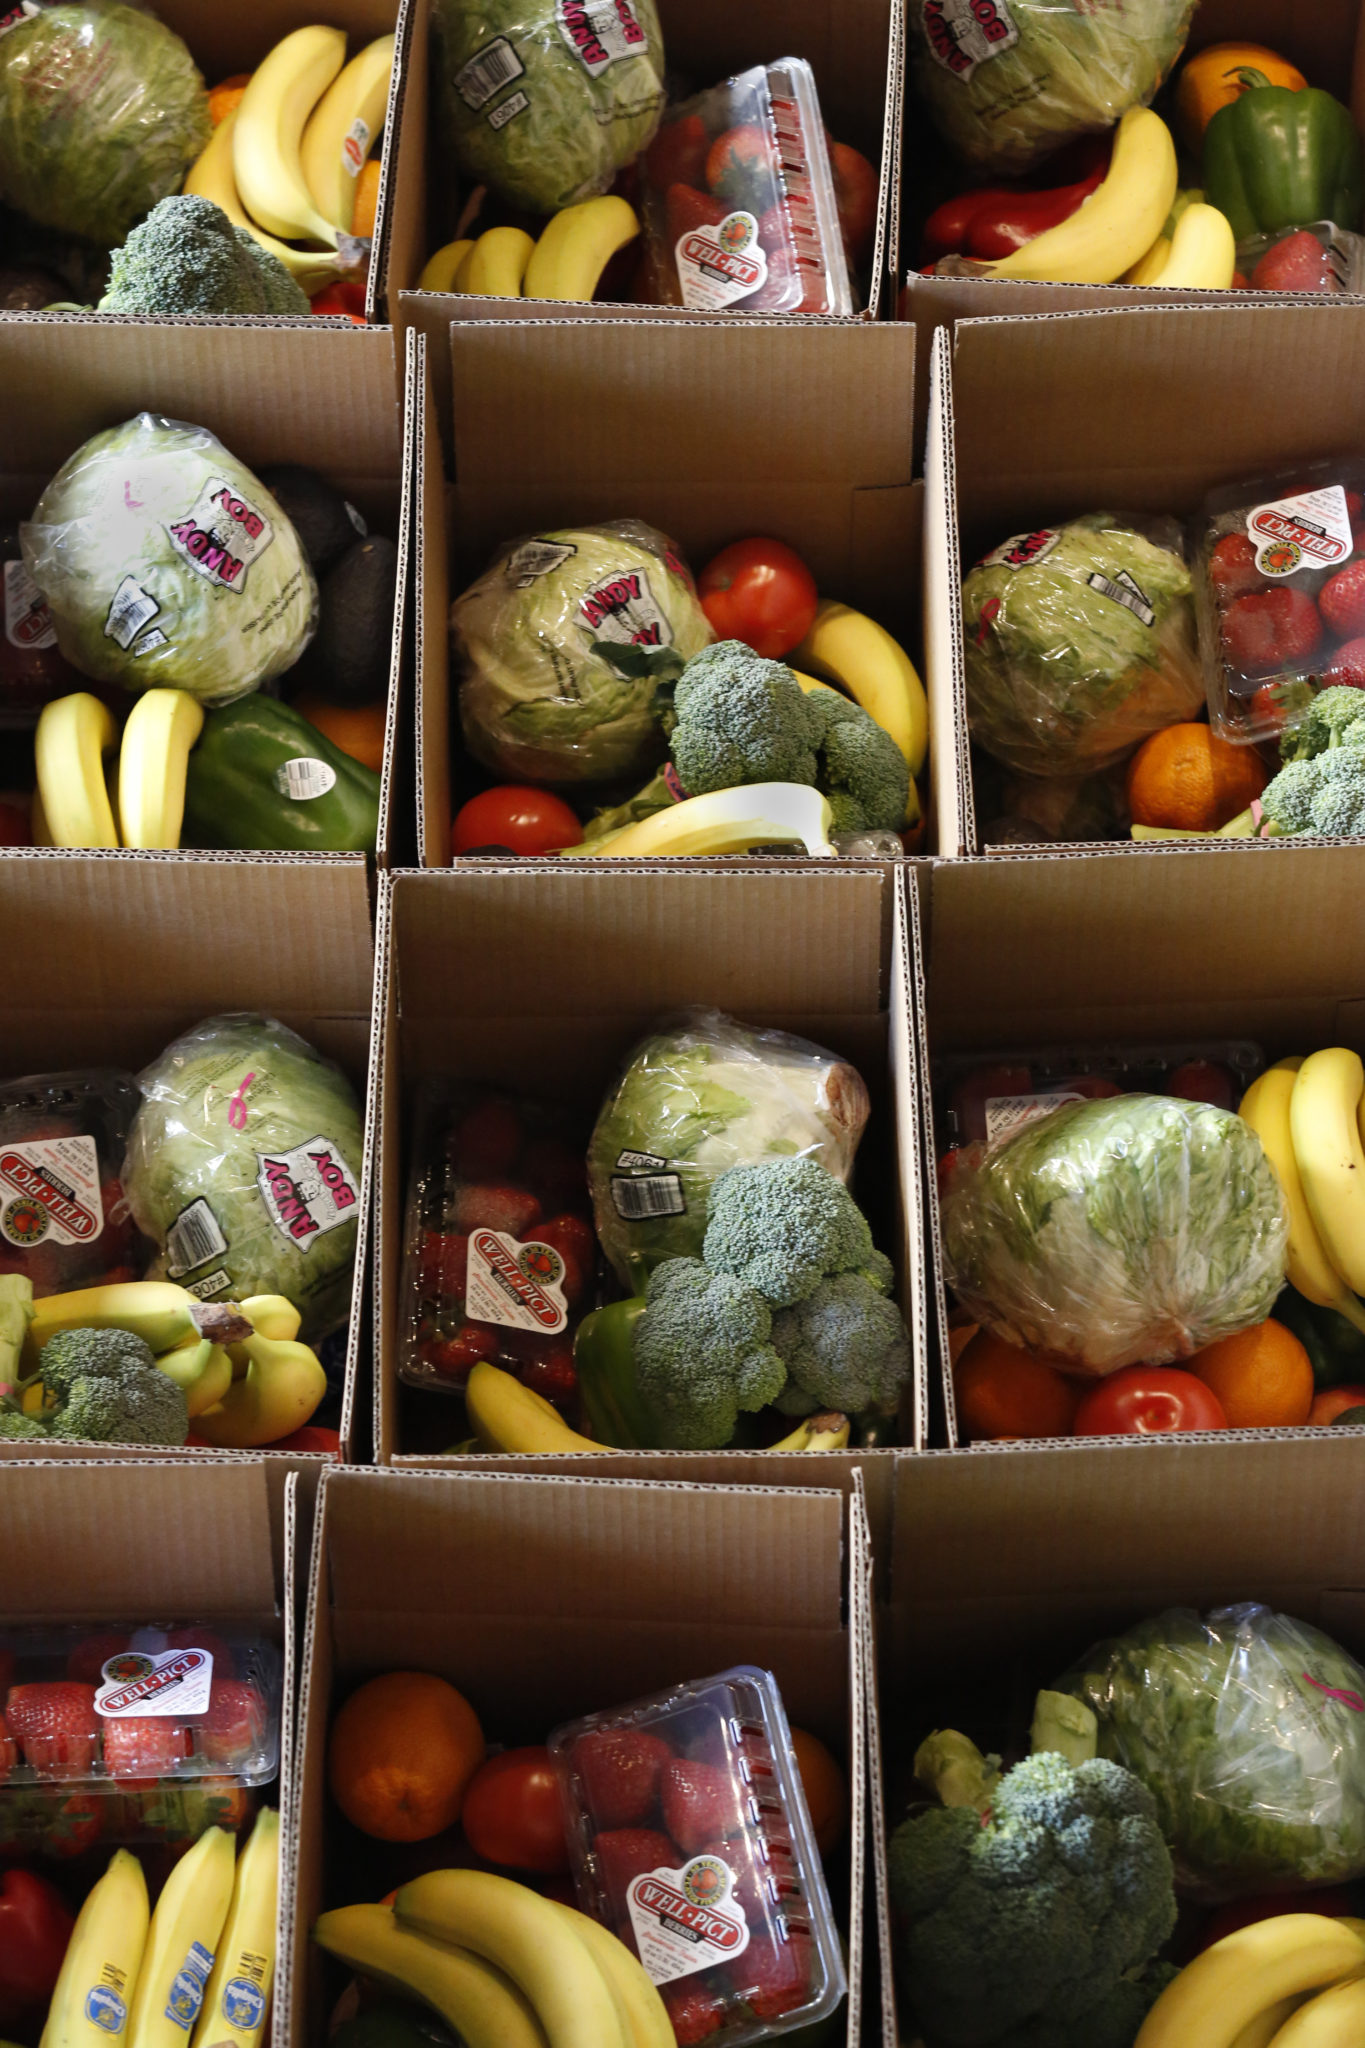 Boxes of produce for grocery boxes available for curbside pick-up at Third Street Aleworks in Santa Rosa, California on Friday, May 1, 2020. (BETH SCHLANKER/ The Press Democrat)